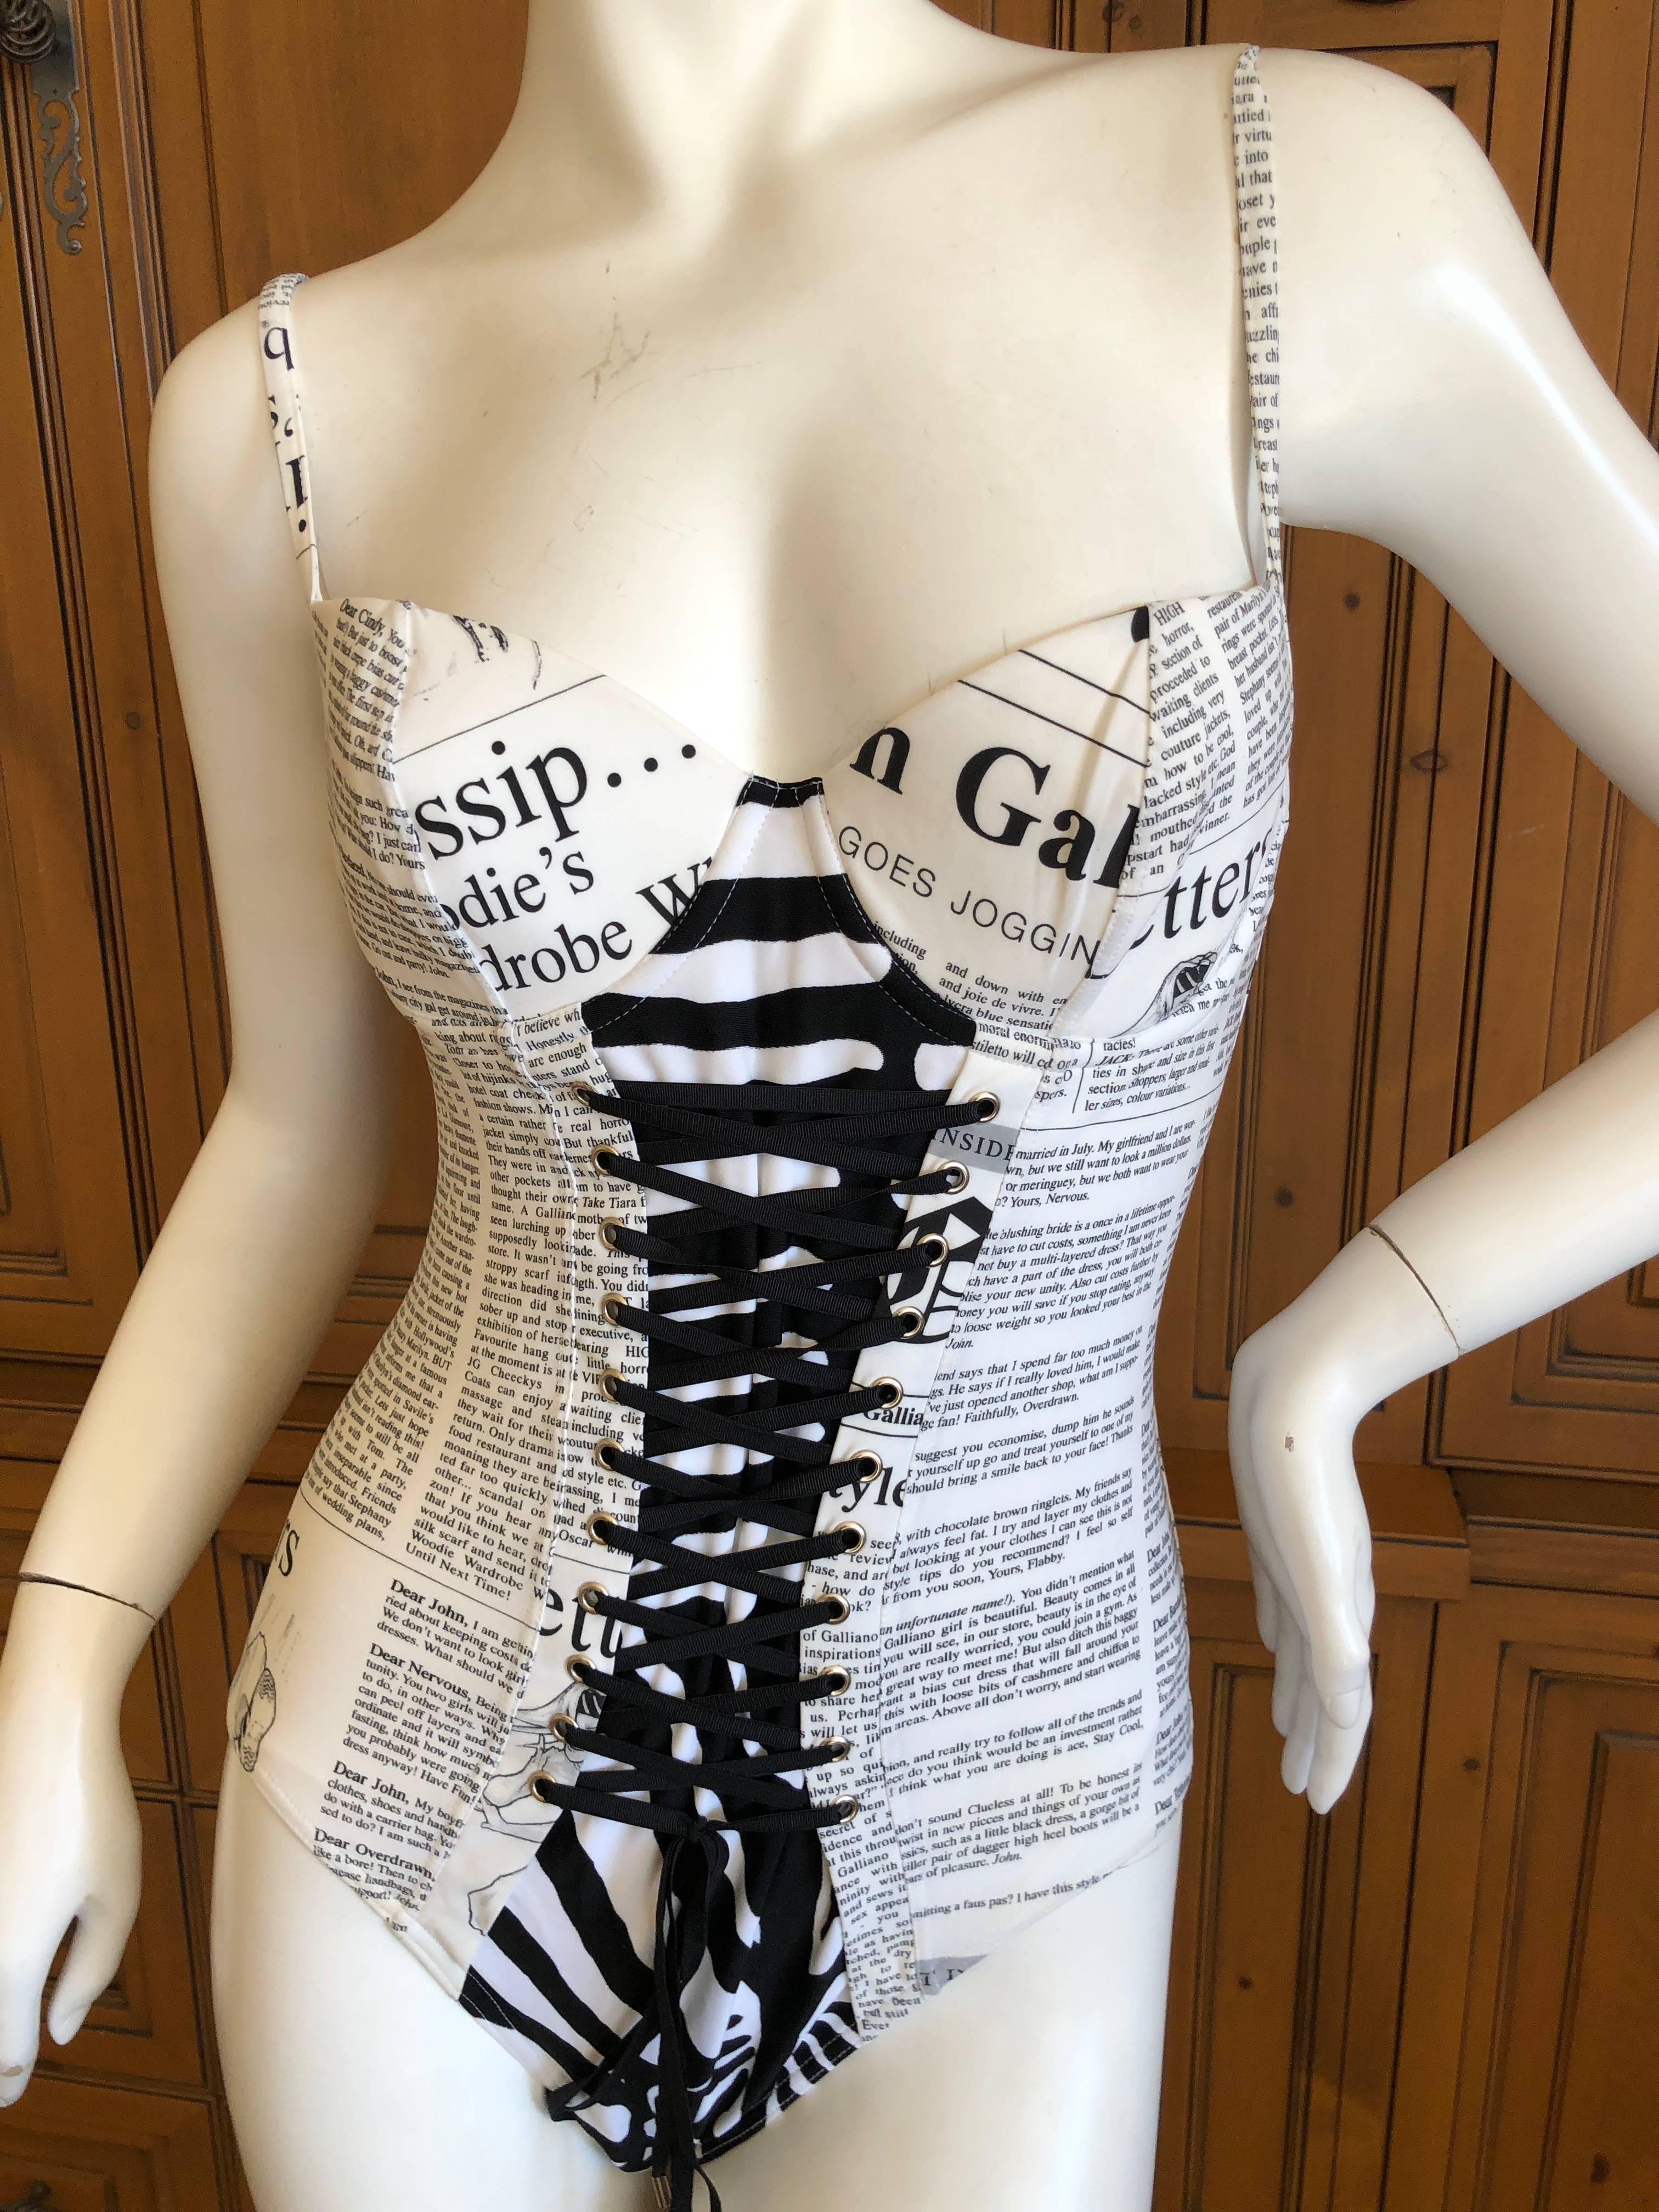 Wonderful one piece swimsuit from John Galliano.
Featuring newspaper with faux gossip stories about Galliano.
Zebra print and corset lace details  pure Galliano.
This has a very slight yellowing all  over, I believe it is intentional , to make the